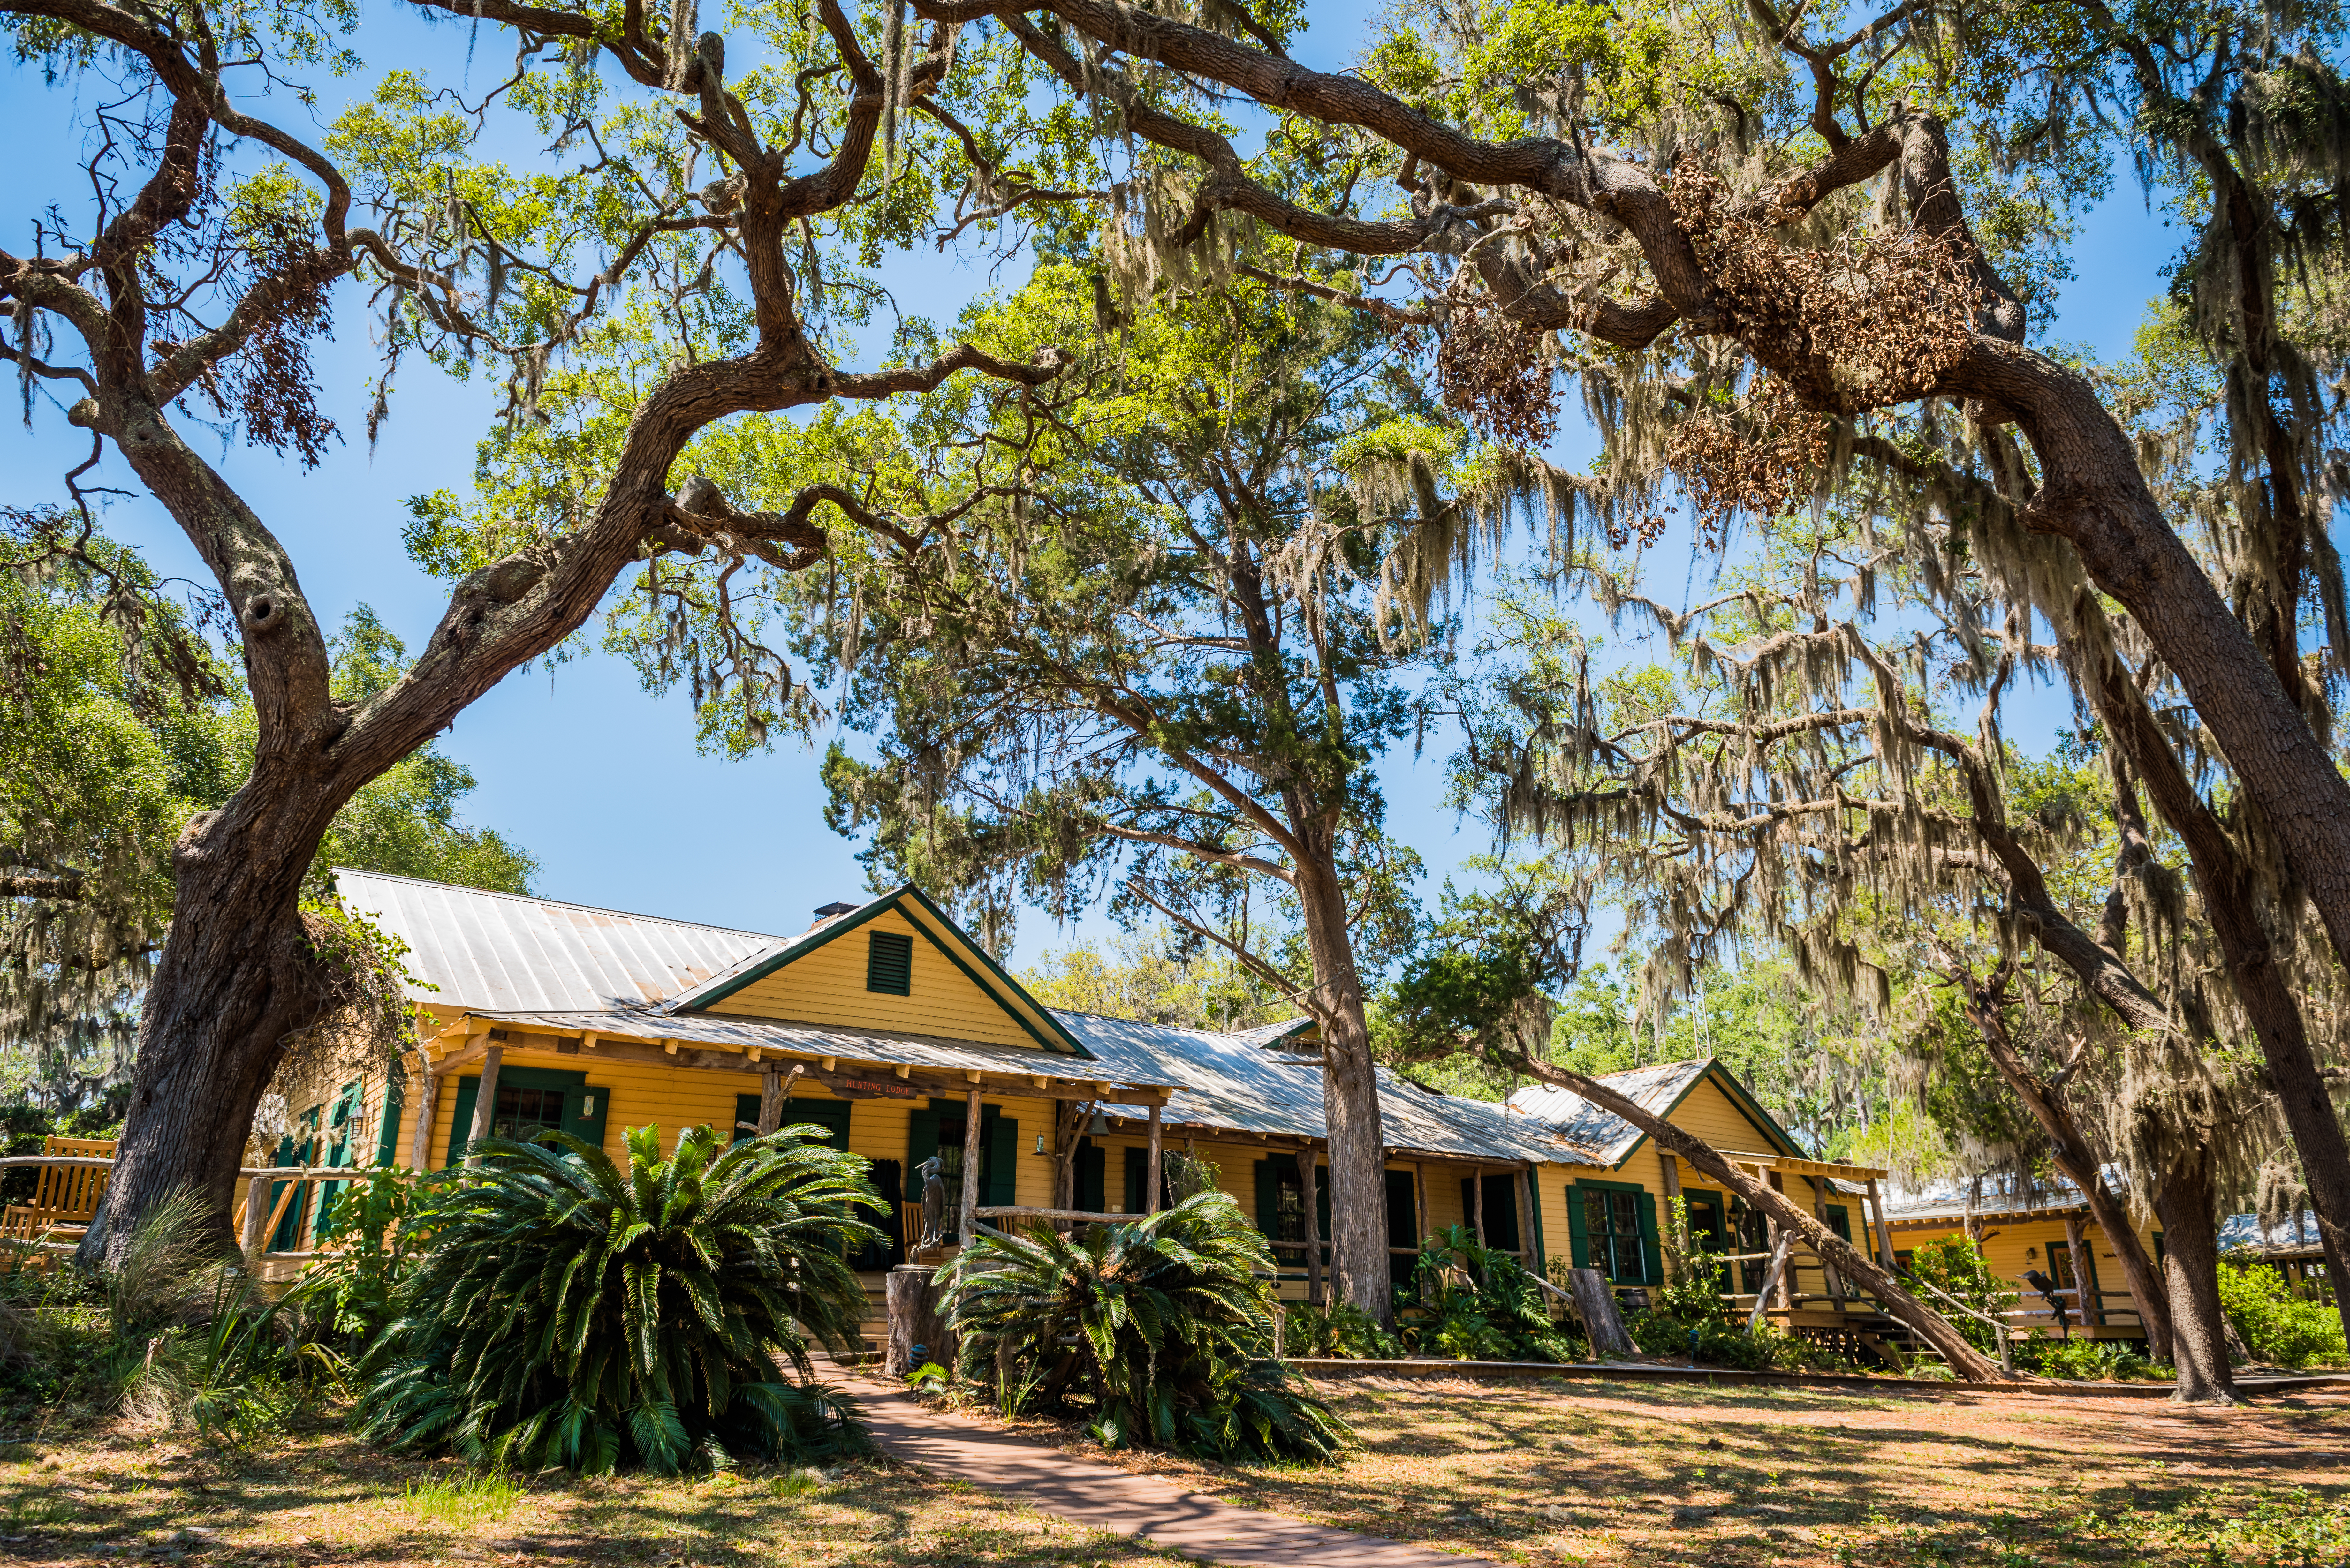 A rustic hunting cabin has been converted to the main lodge on Little St. Simons Island, Georgia